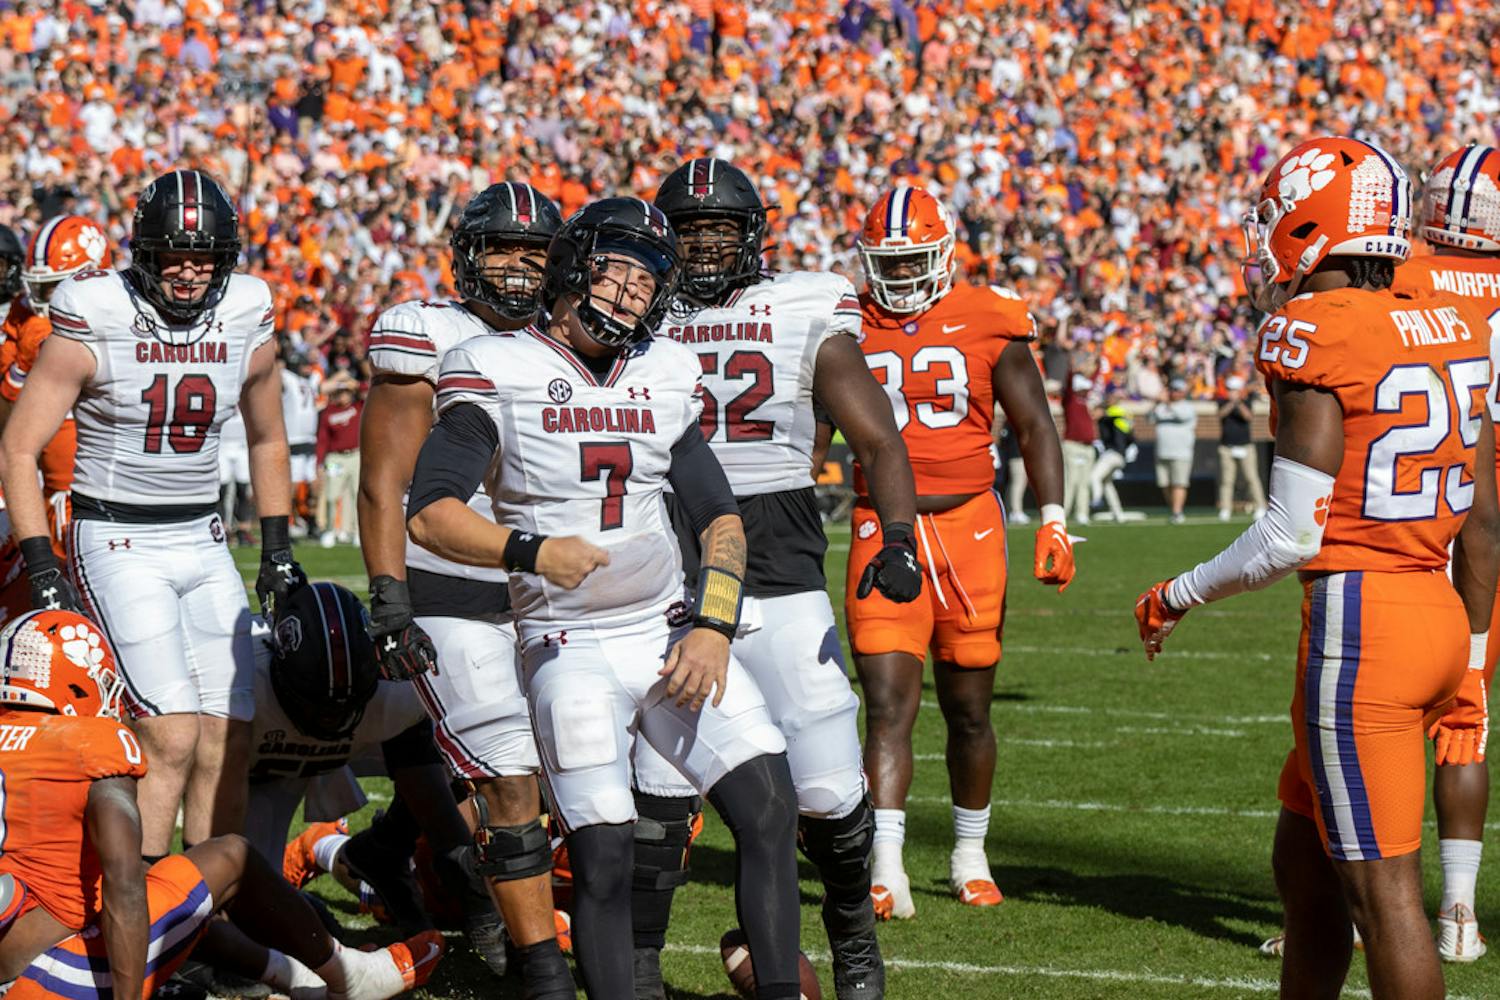 The Gamecocks defeated rival Clemson 31-30 in the Palmetto Bowl after a competitive game. The Palmetto Bowl marks the end of regular 鶹С򽴫ý for both teams and leads to the playoffs. The marked the first time the Gamecocks have beaten the Tigers since November 2013 and snapped Clemson's 40-game home winning streak.&nbsp;